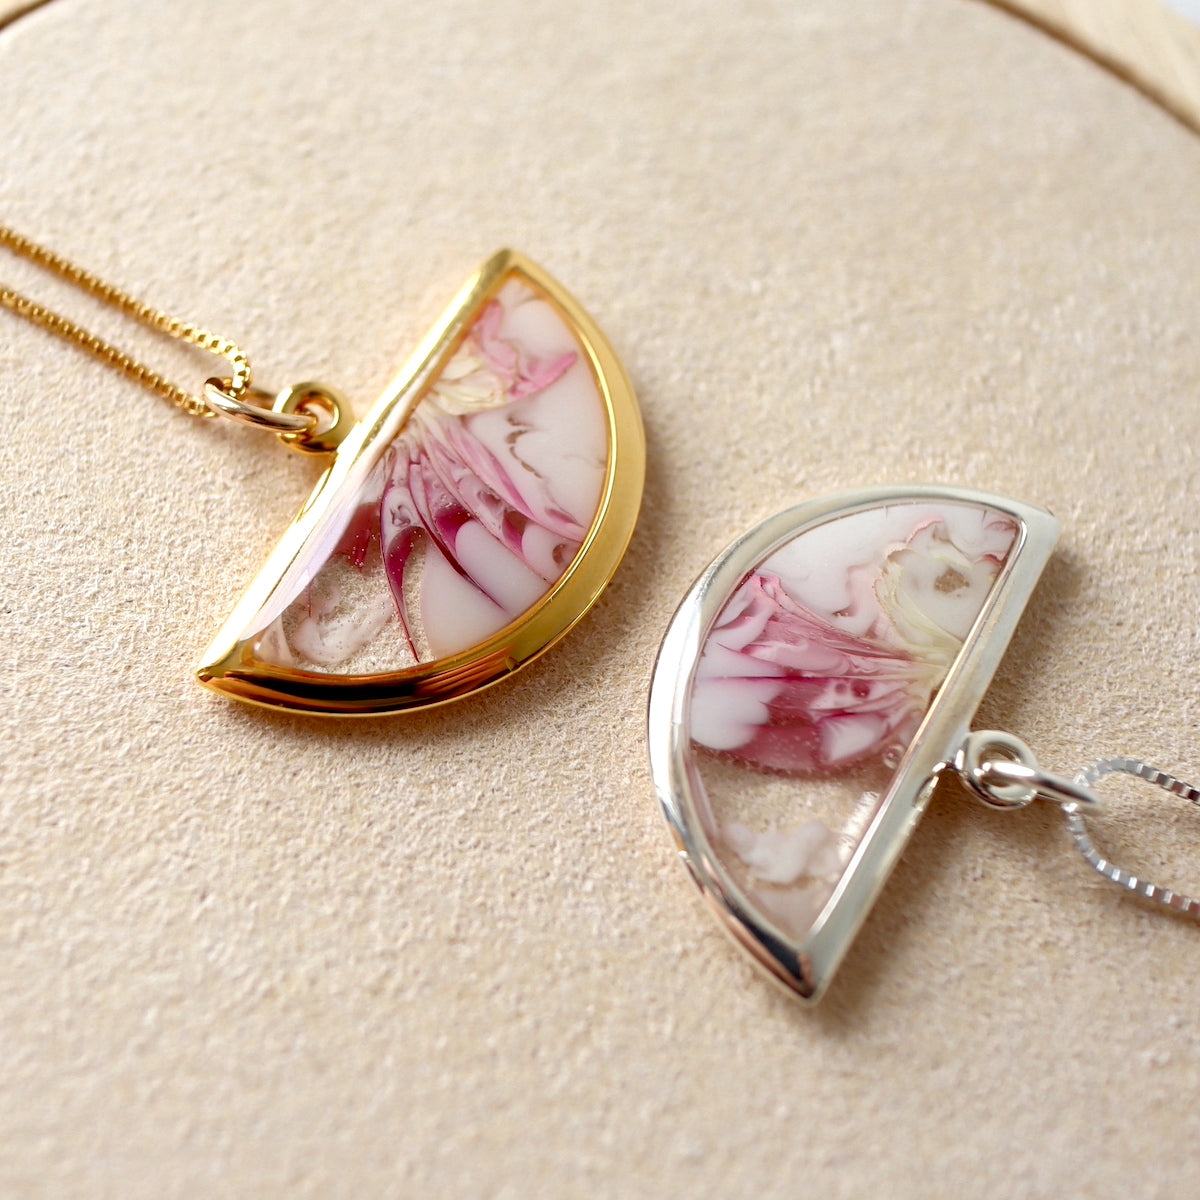 Florals. Encased Gold Half-moon Necklace with Dahlia Flowers